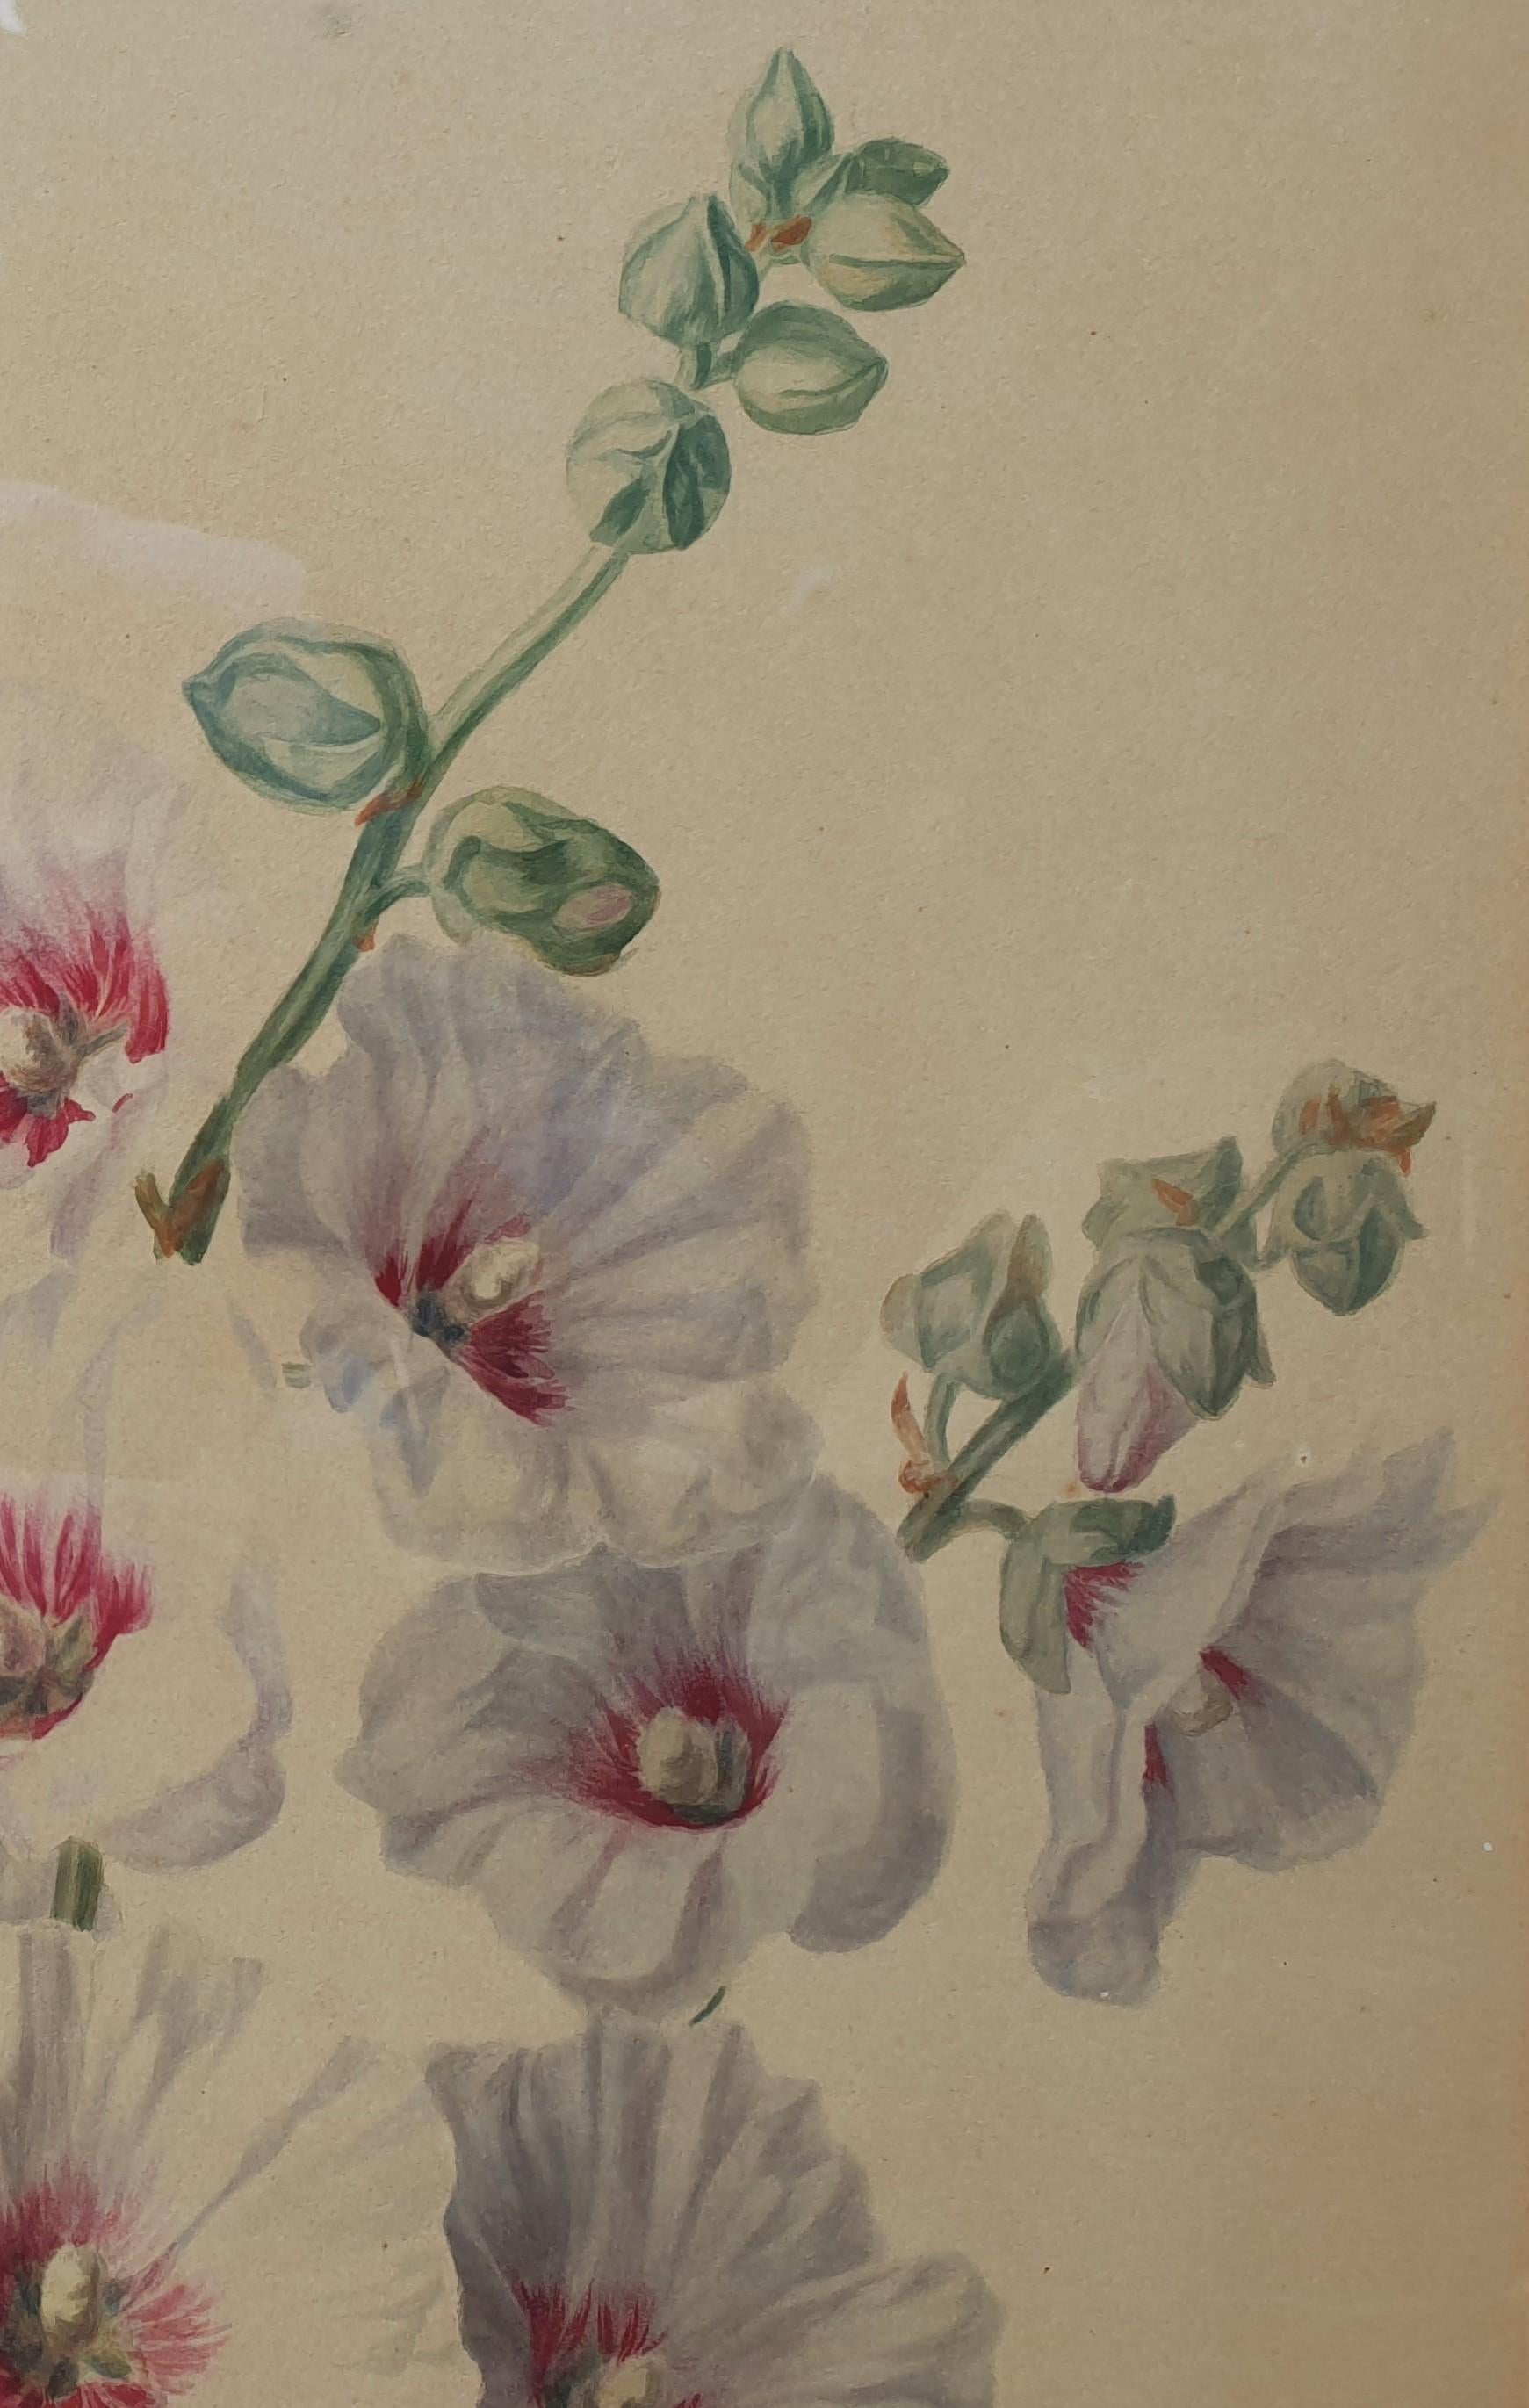 French school of the mid-19th century

Watercolor
51 x 37 cm (69 x 55 cm with frame)
Signed and dated at the bottom “M. C. / 1857”

The hollyhock comes from China, passing through Syria, from where it was brought to us at the time of the